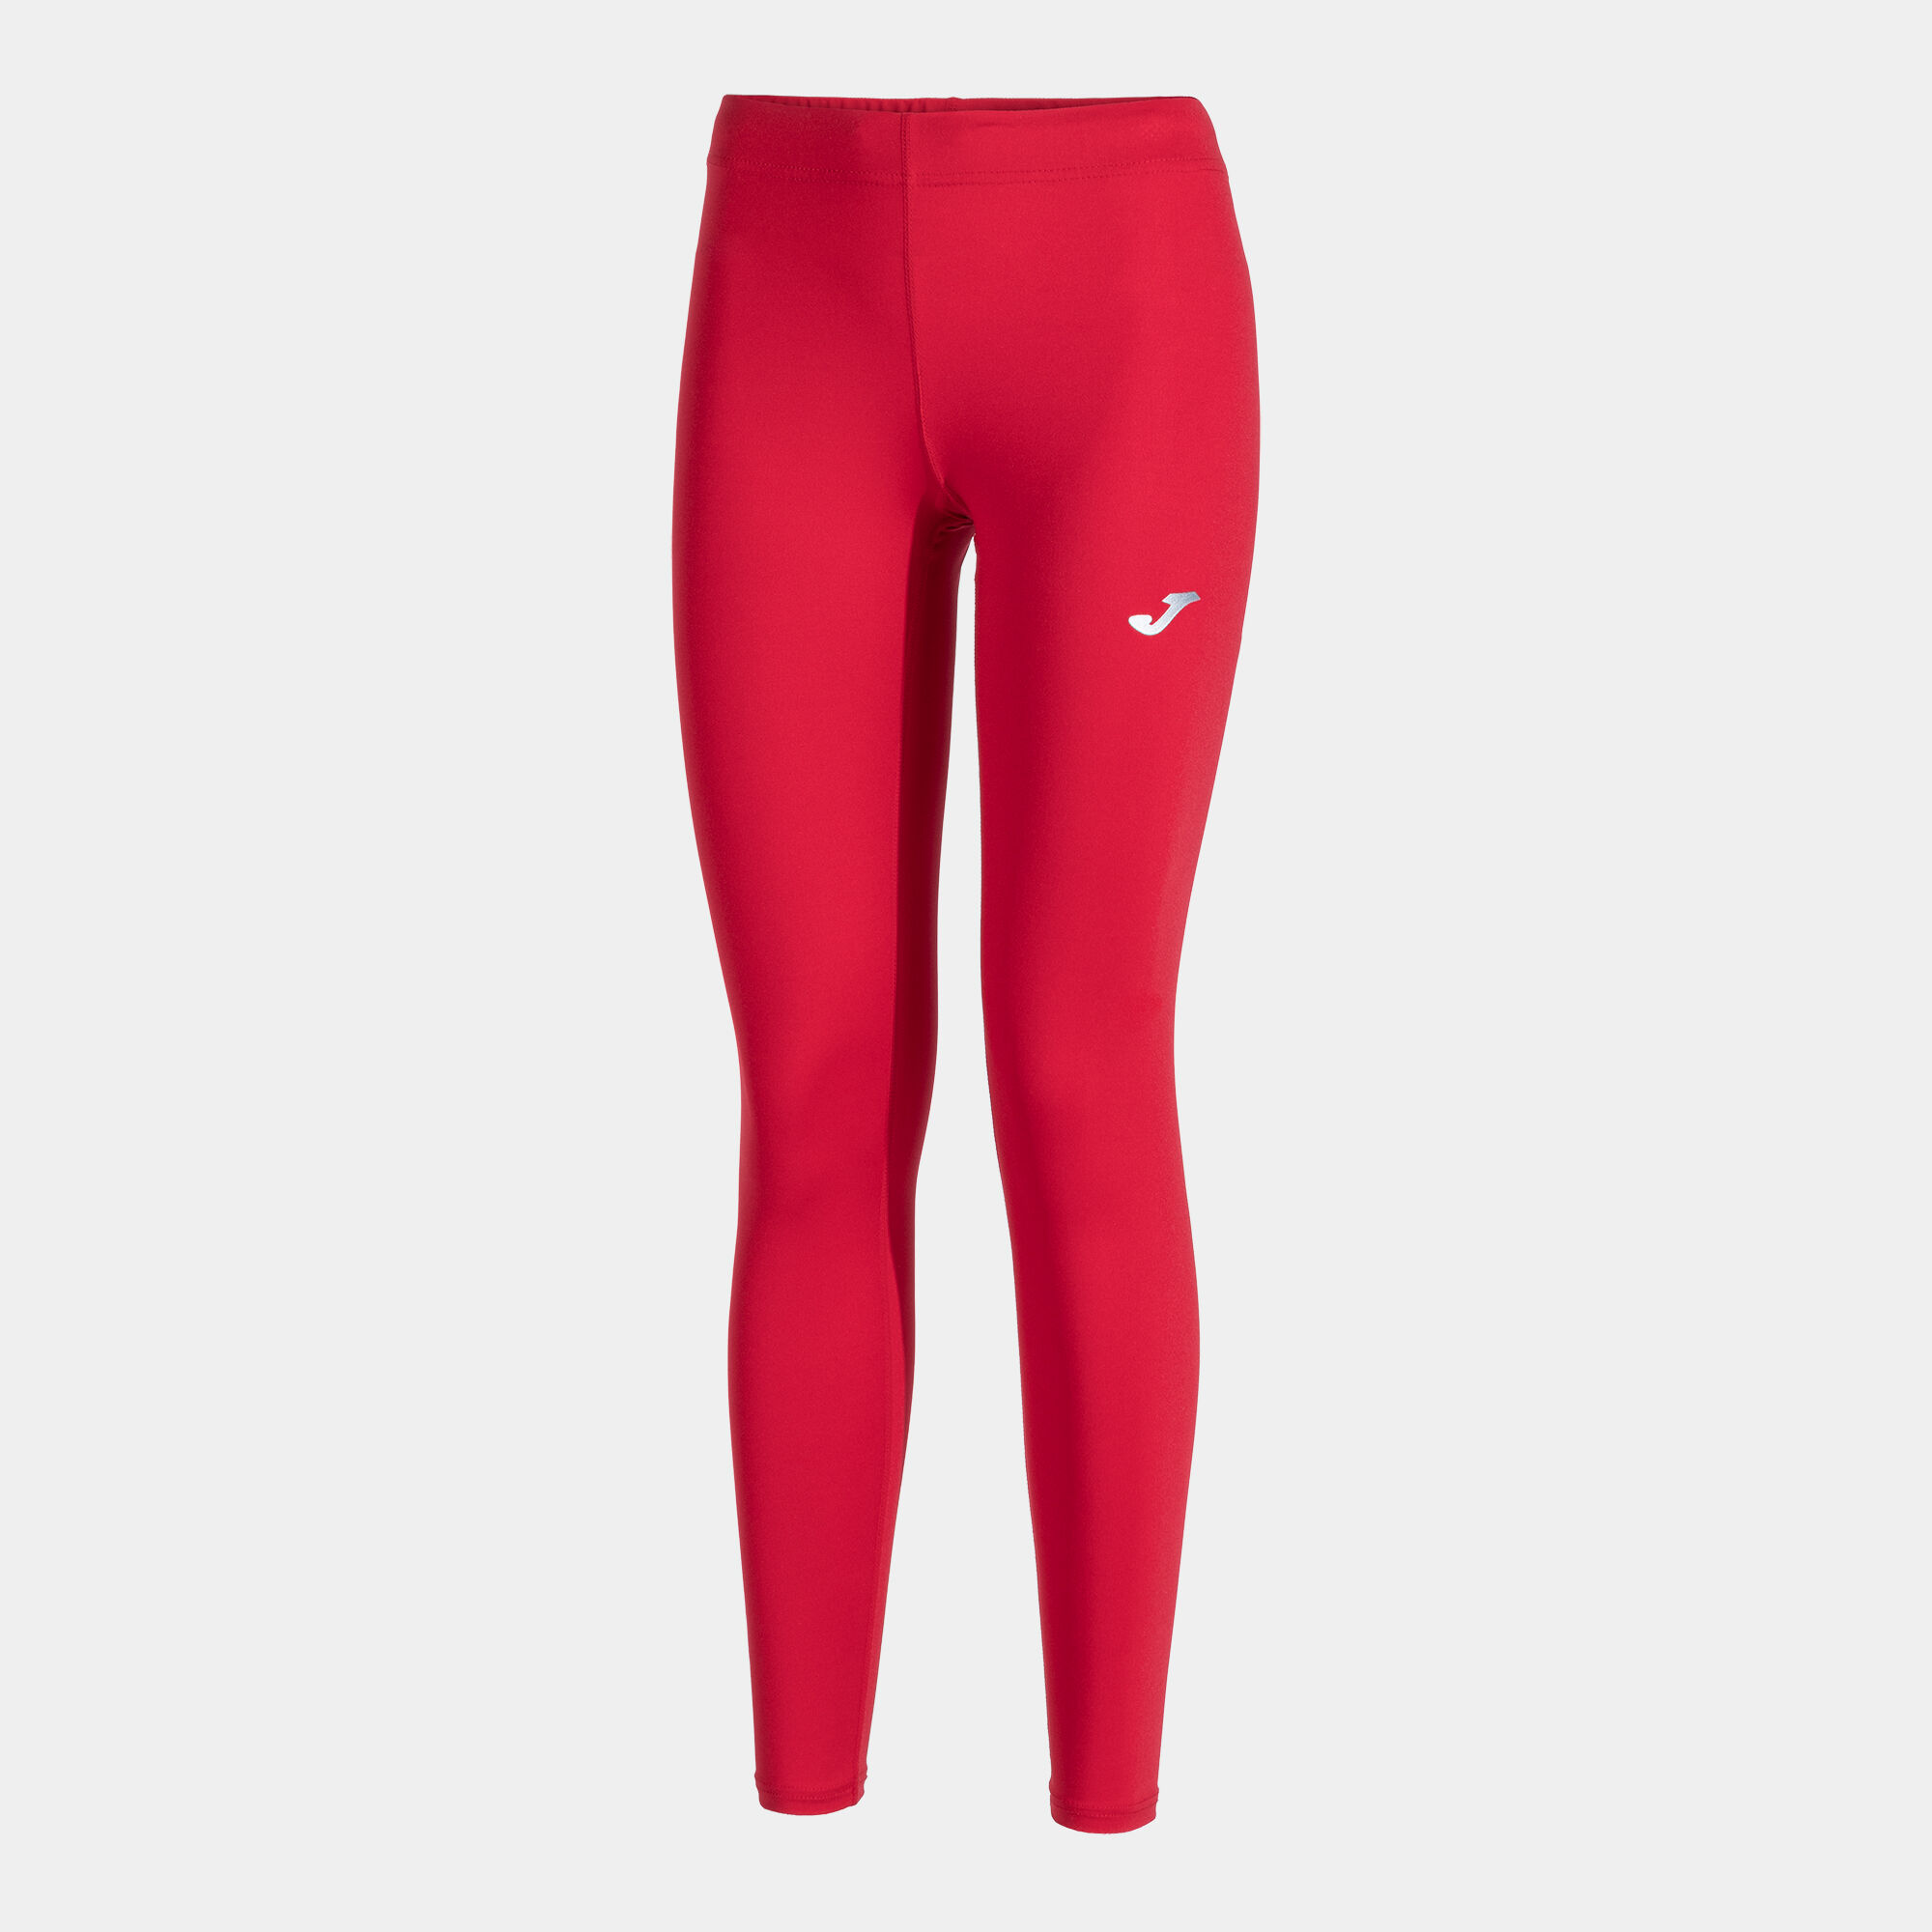 Long tights woman Olimpia red